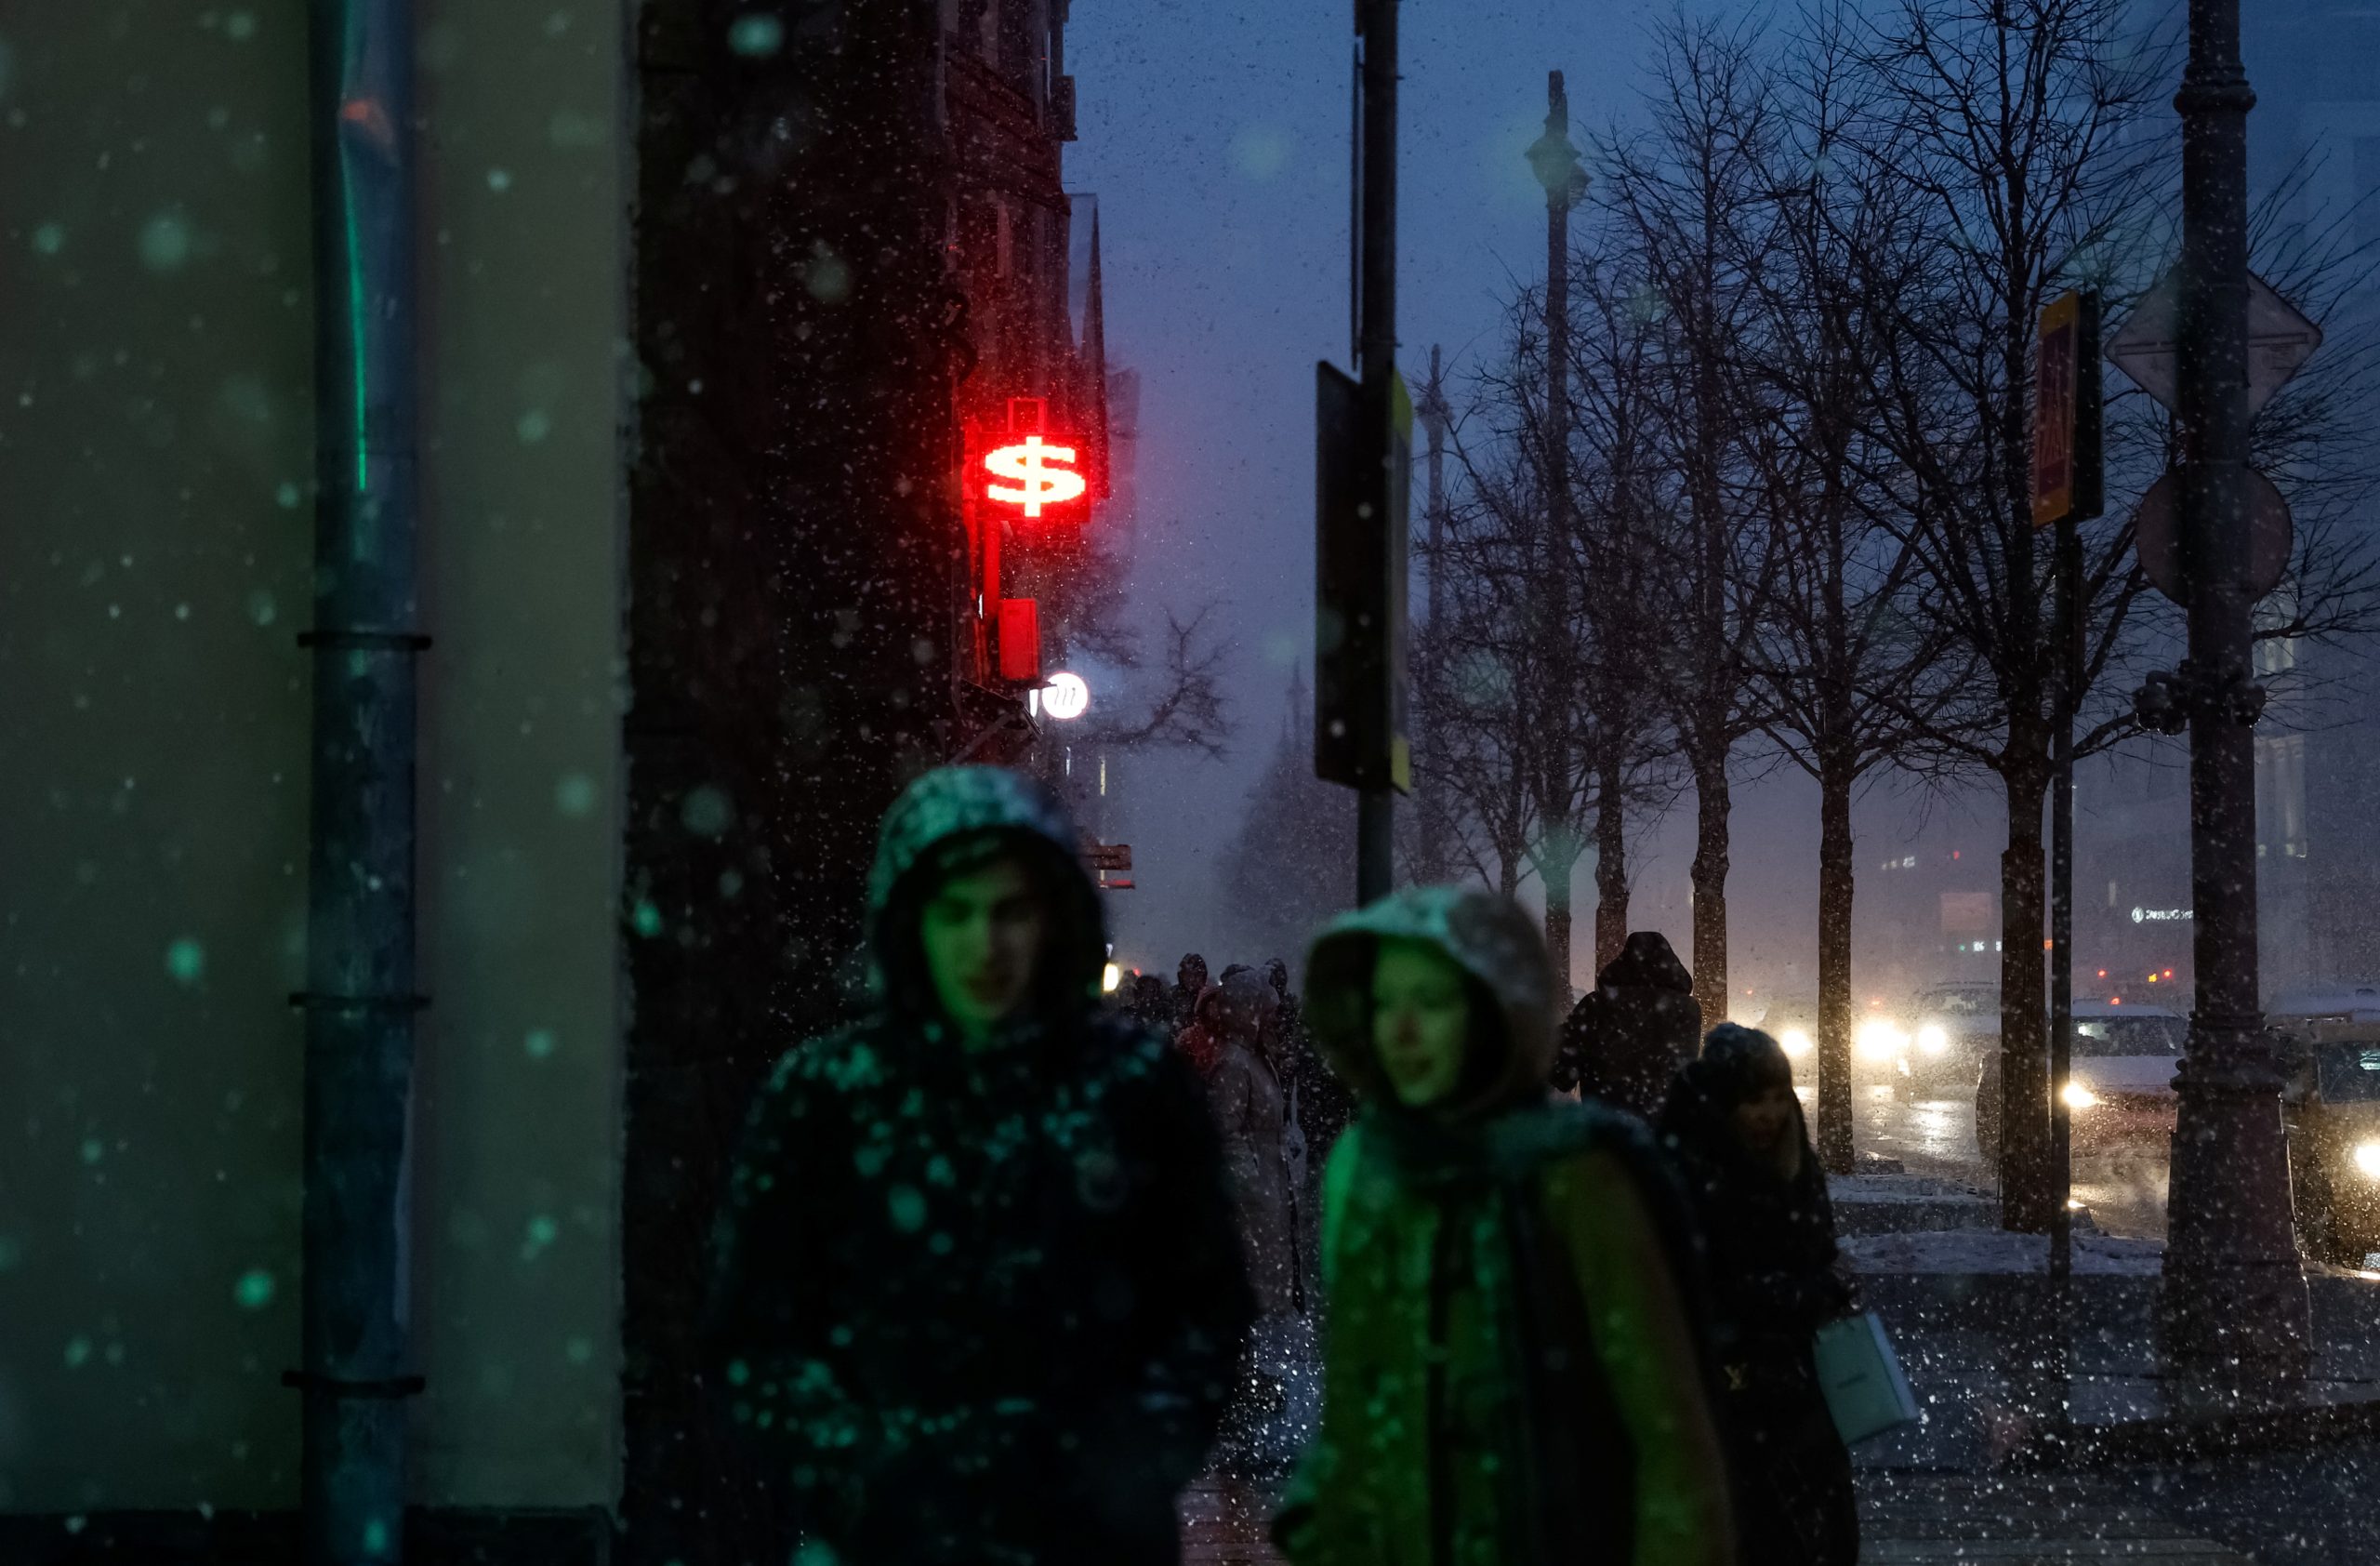 Photo: People walk in the street during heavy snowfall as a sign in the shape of the dollar symbol is seen on a currency exchange office in the background, in Moscow, Russia, April 6, 2022. Credit: REUTERS/Maxim Shemetov